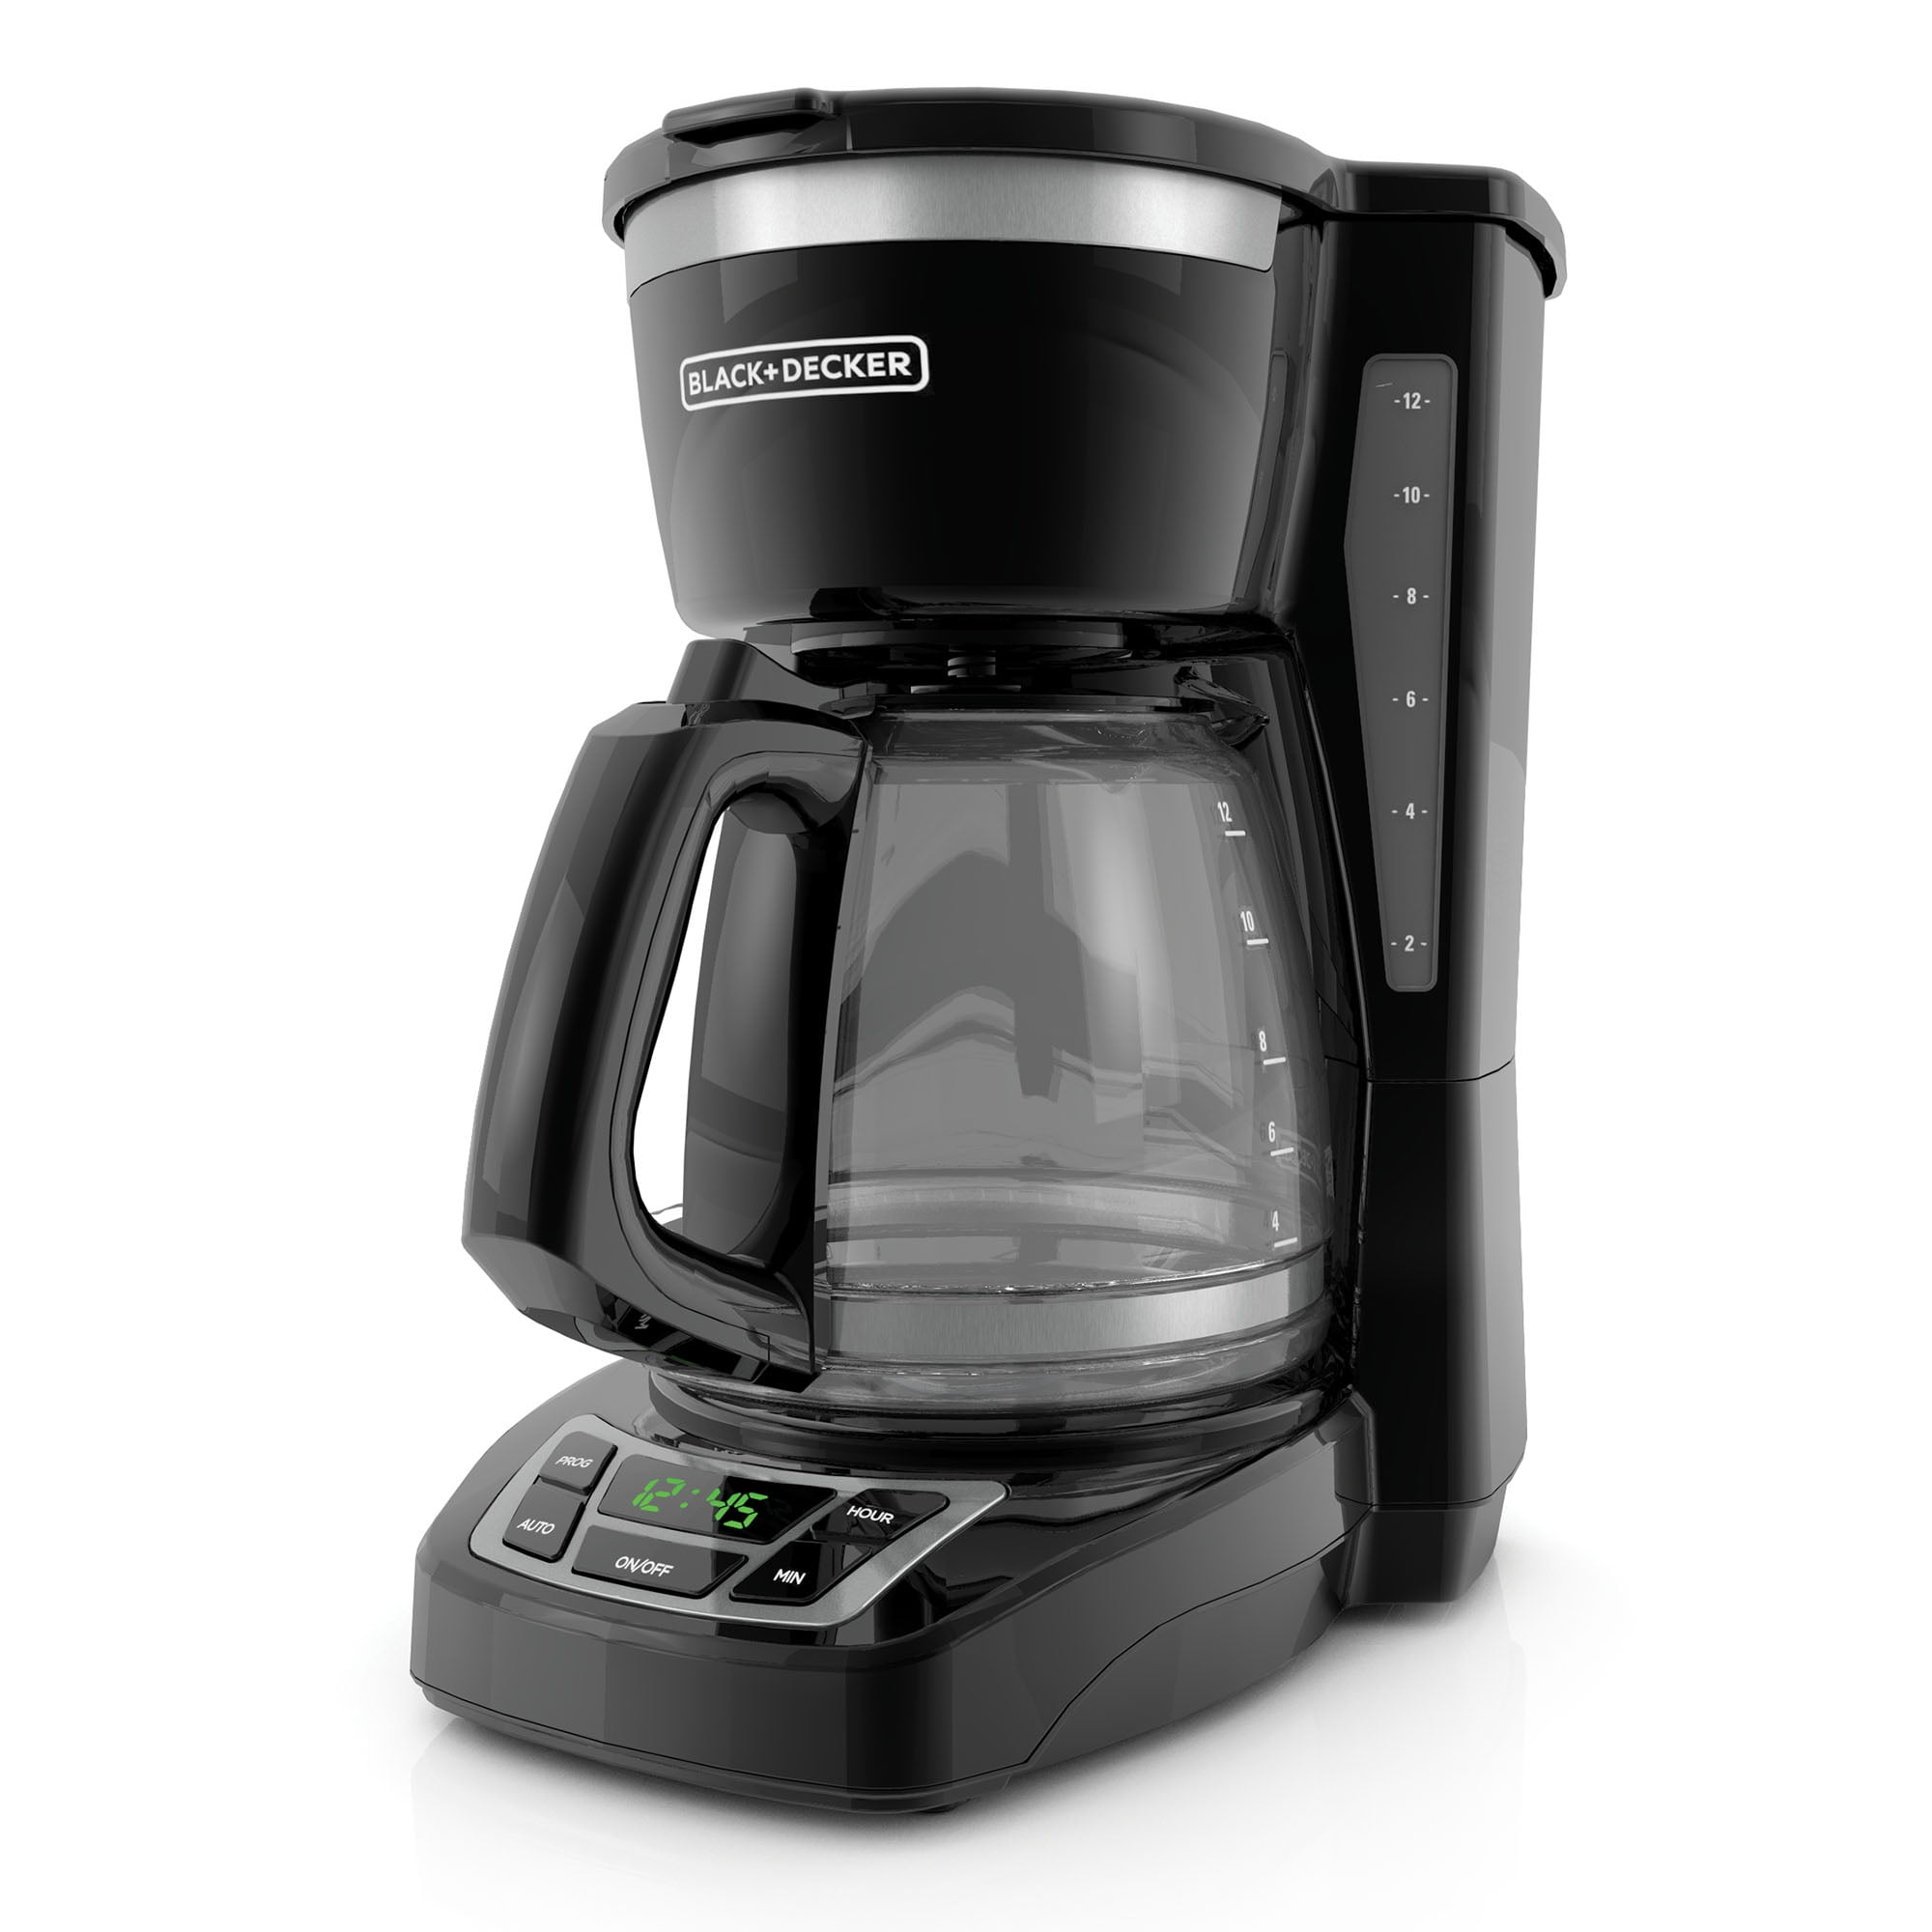 BLACK & DECKER 12 Cup Programmable Coffee Maker - Black (for PARTS) -  electronics - by owner - sale - craigslist